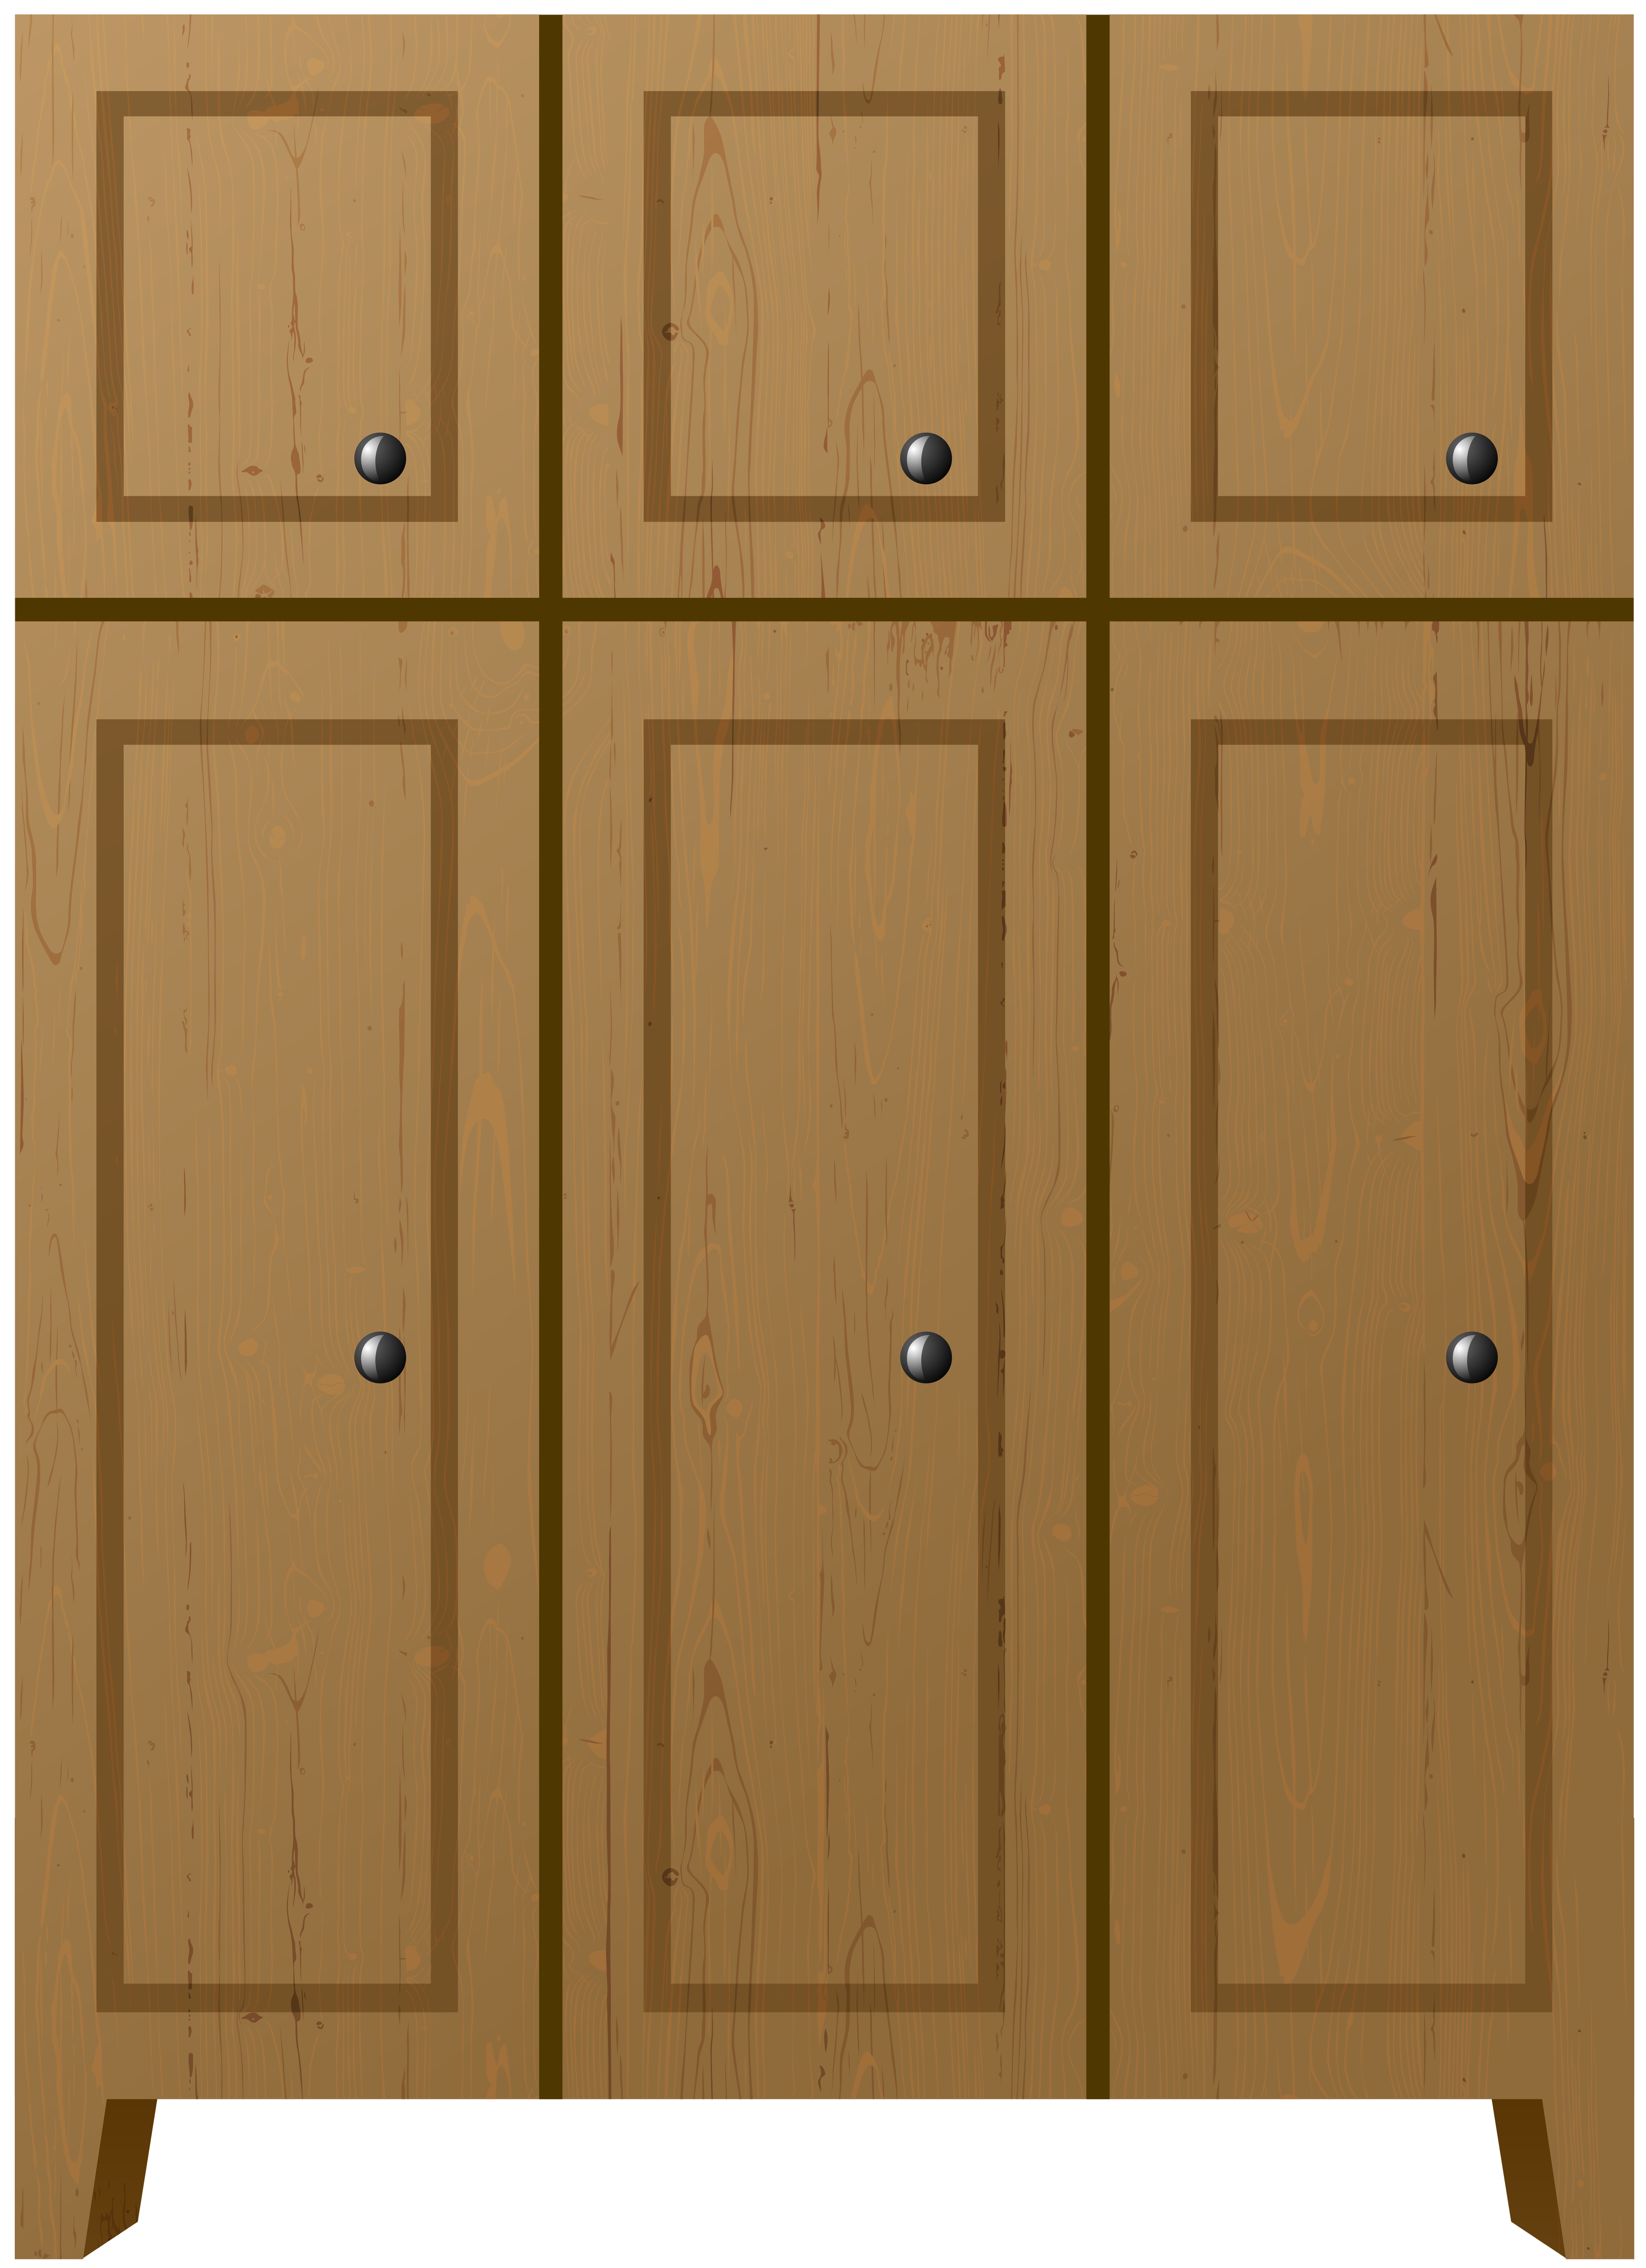 Closet Top View Png For Photoshop